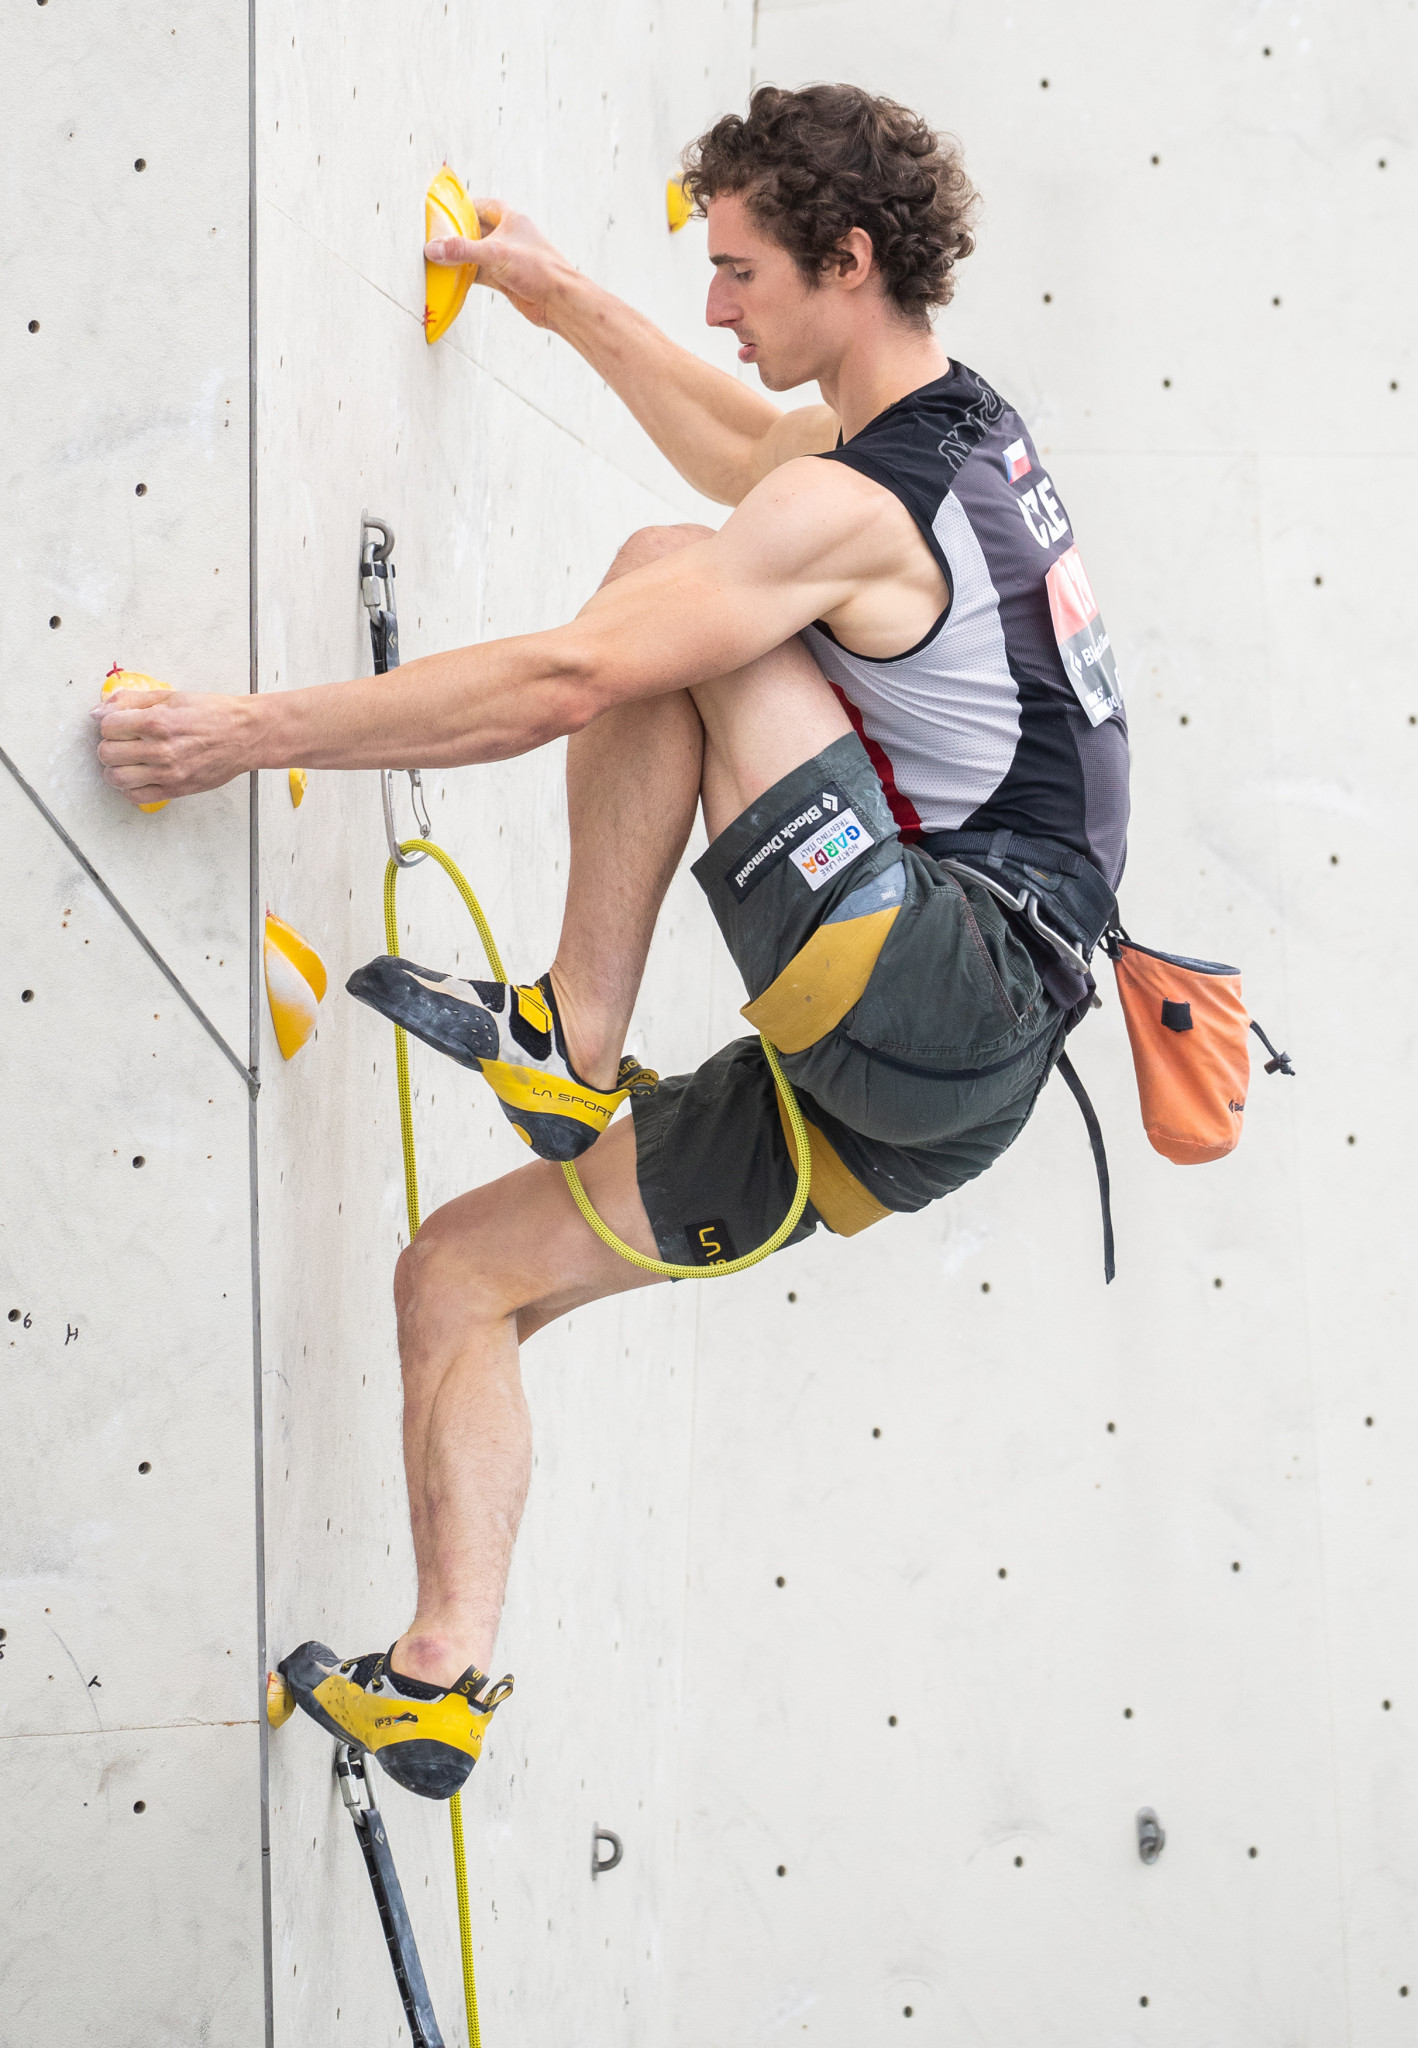 Ondra's triple lead title hopes looking strong at IFSC Climbing and Paraclimbing World Championships